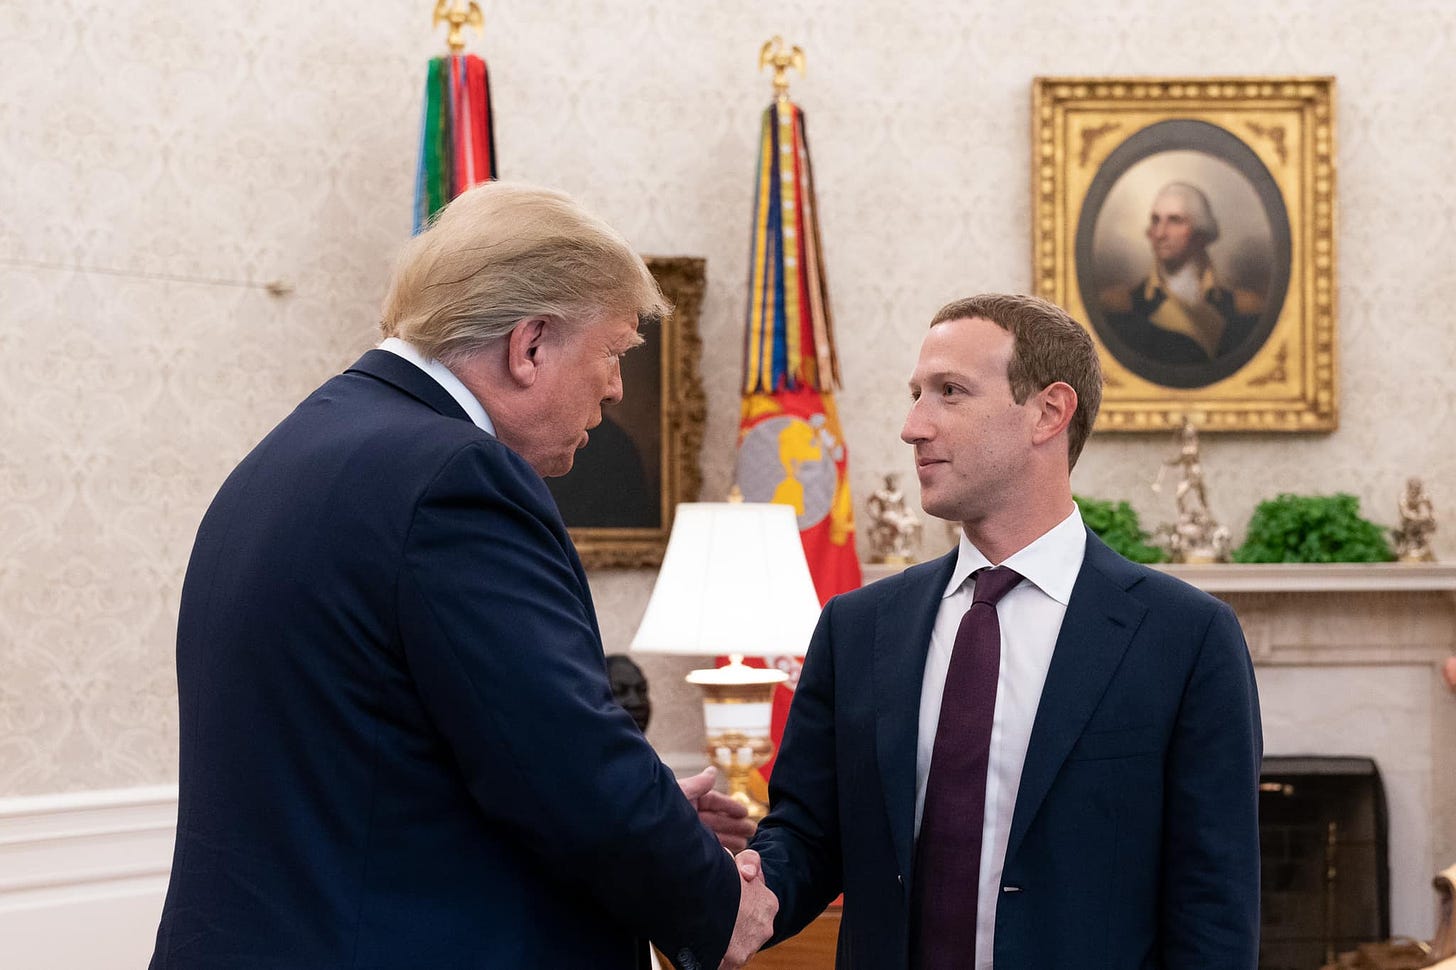 Photo of Donald Trump and Mark Zuckerberg meeting in the White House in 2019.